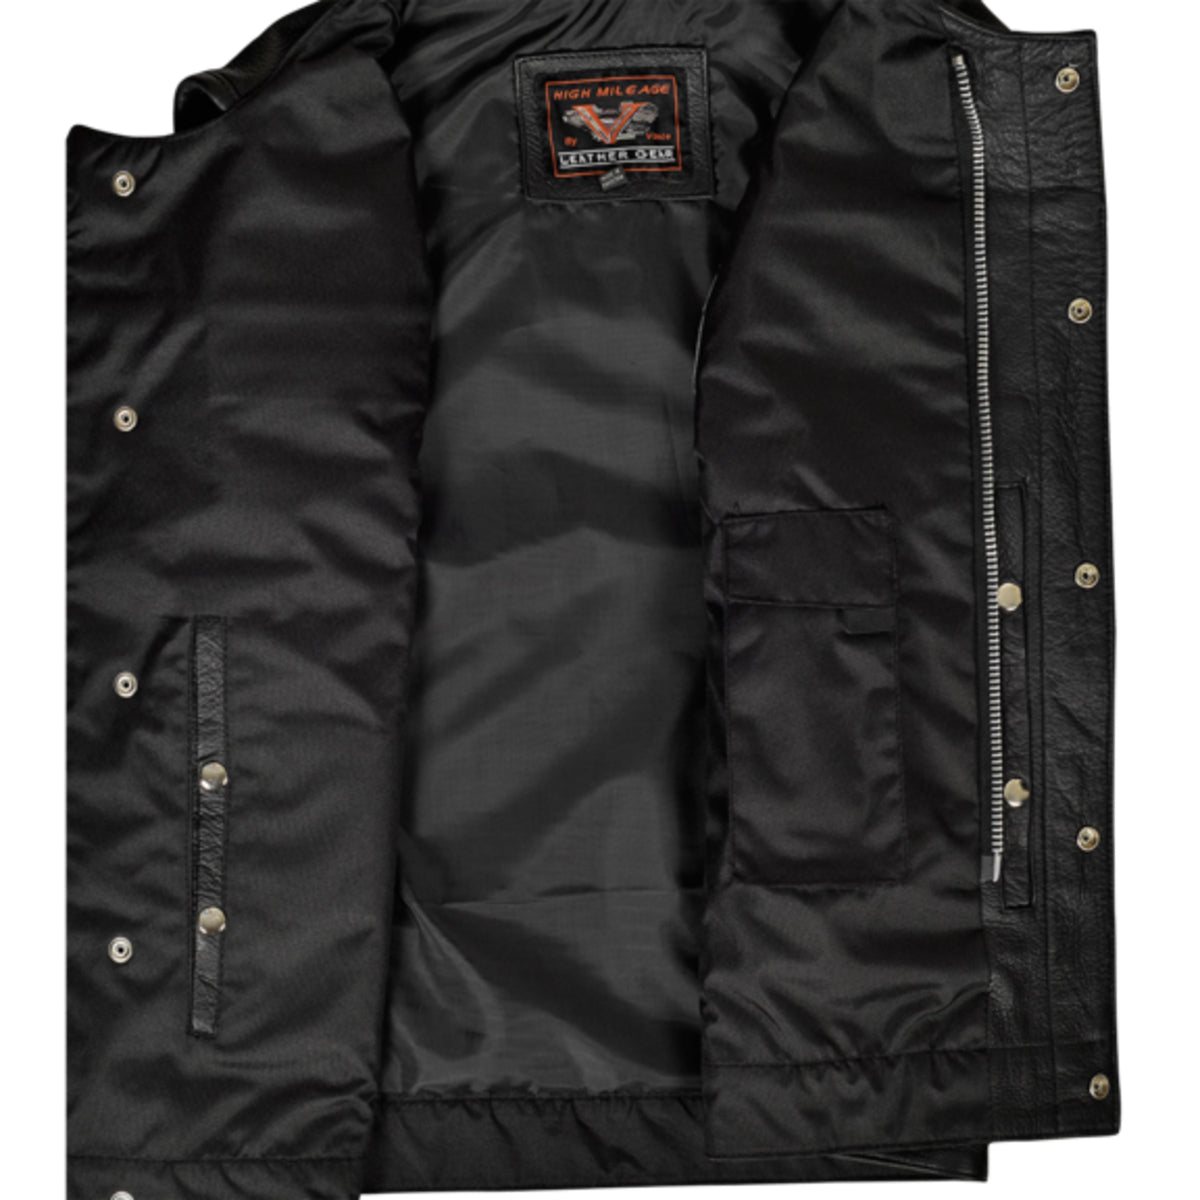 Vance Men's Zipper and Snap Closure Leather Motorcycle Club Vest